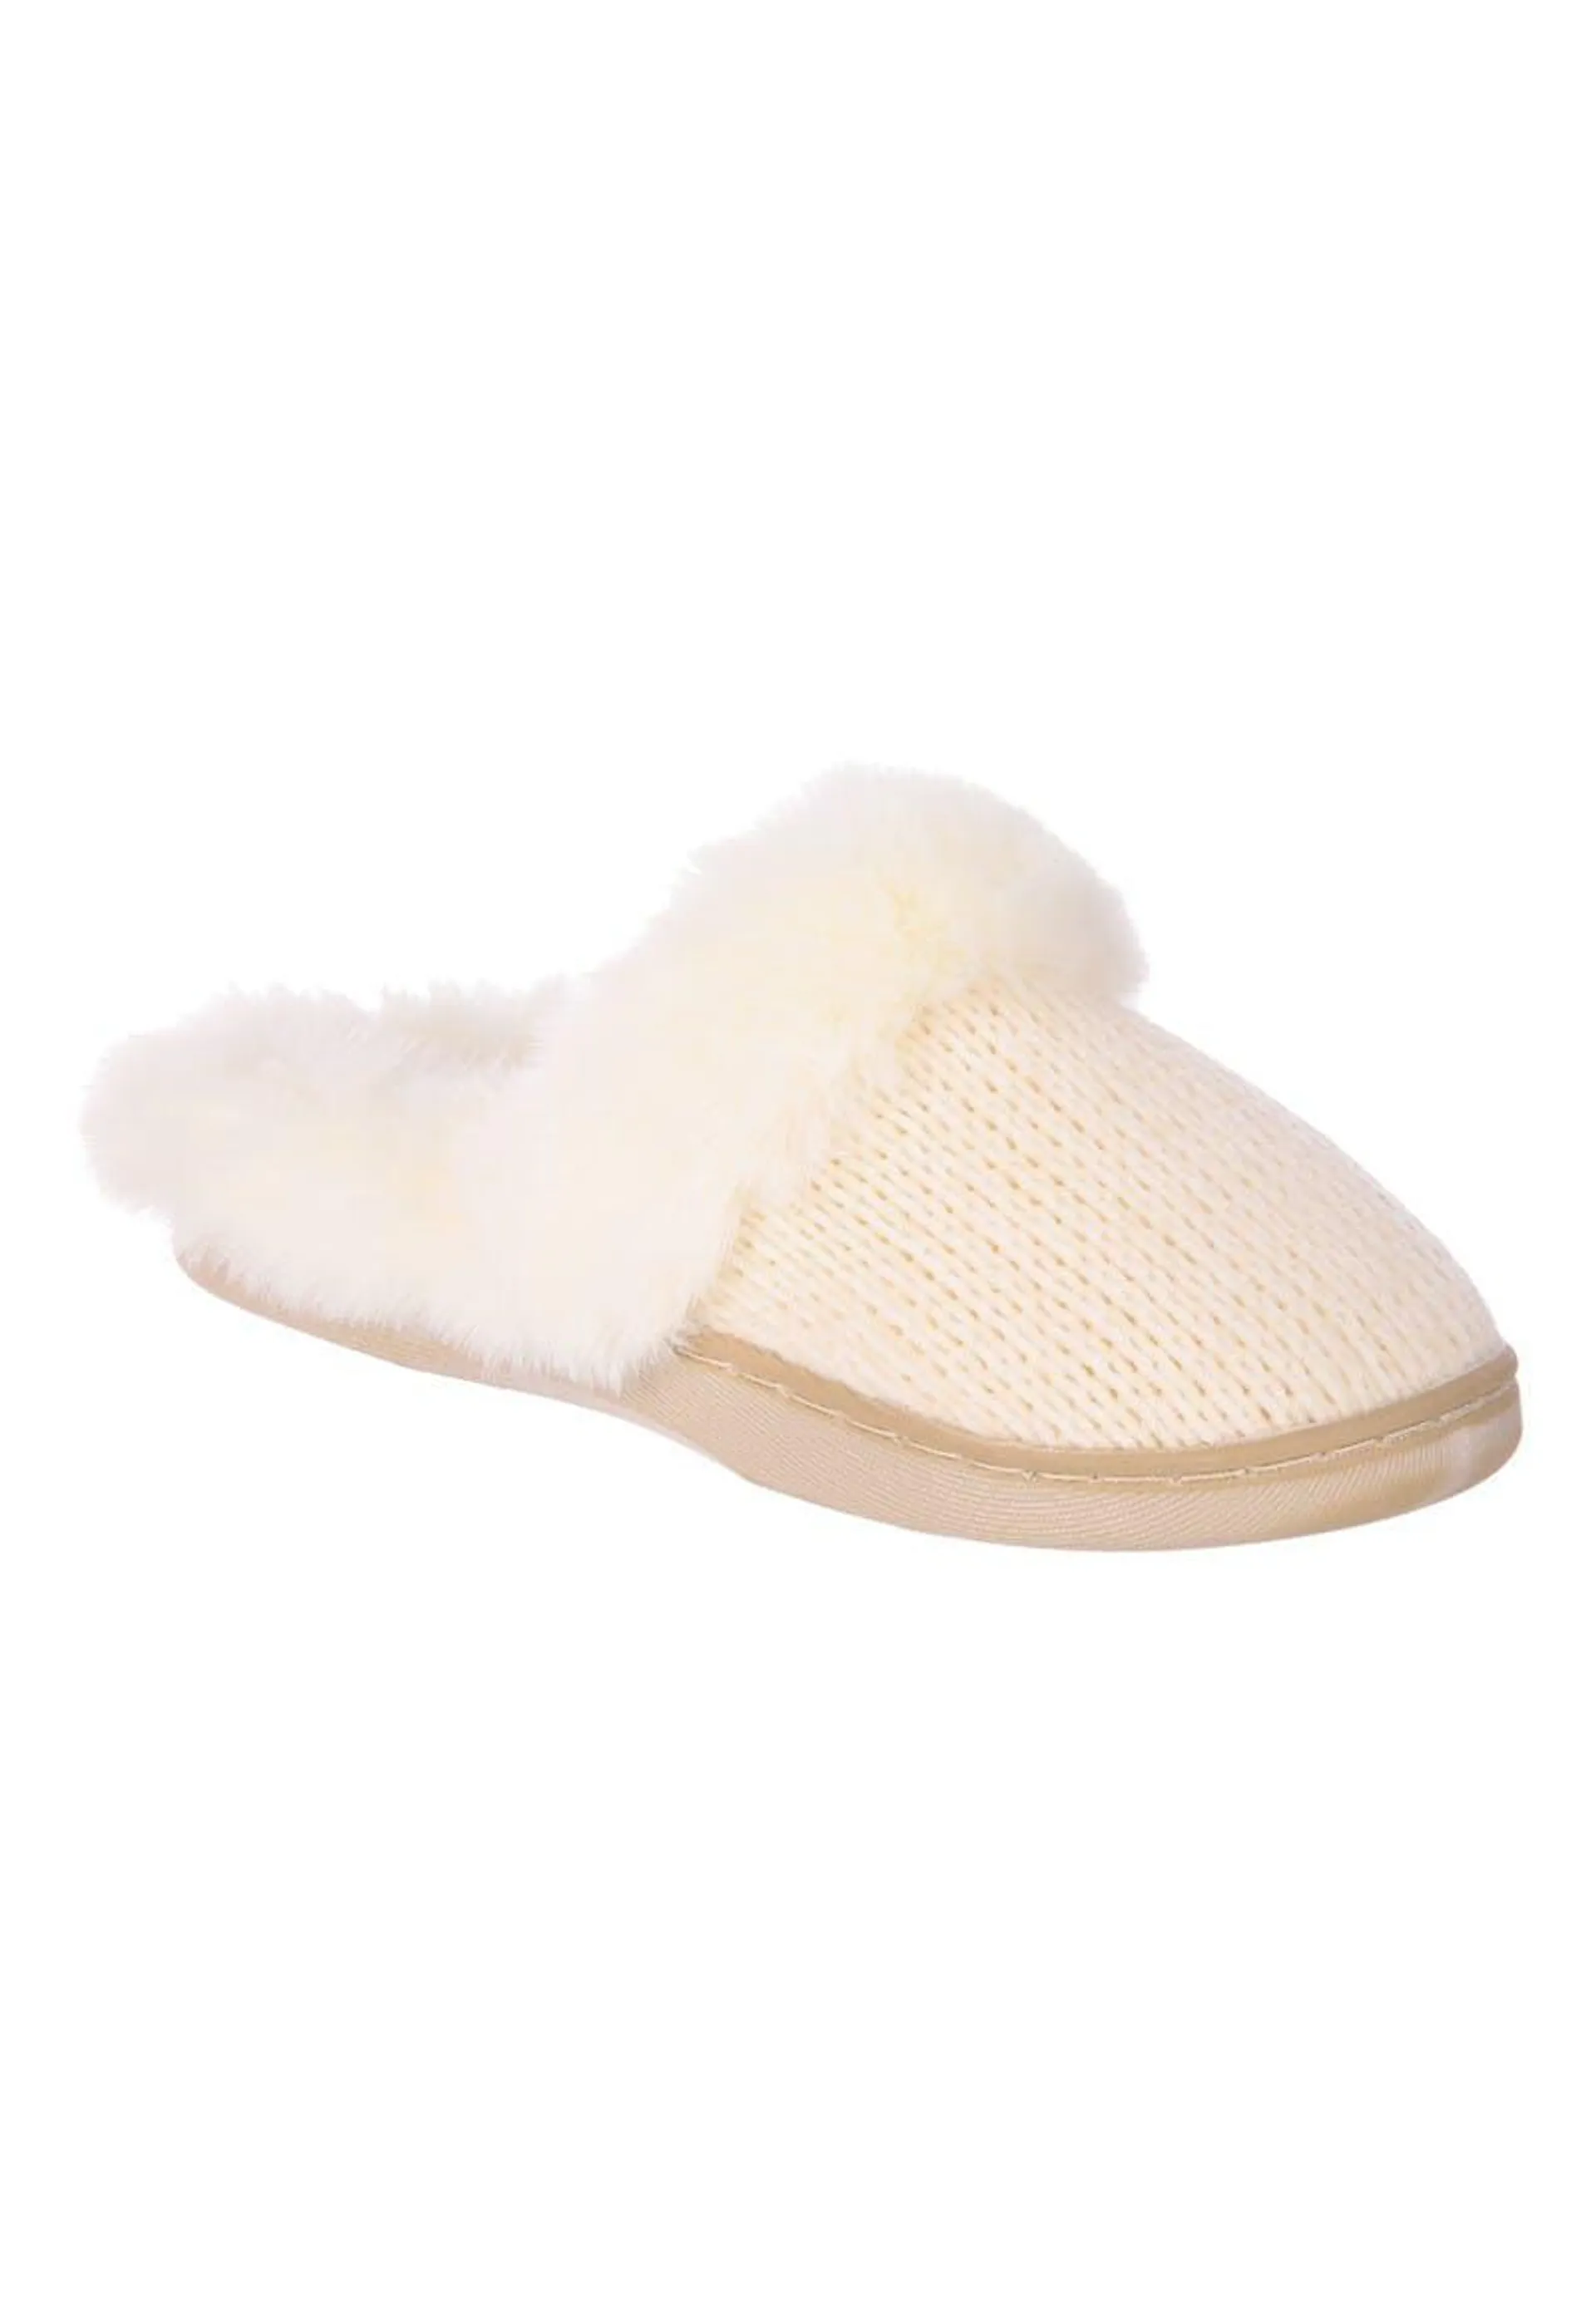 Womens Cream Faux Fur Knitted Mule Slippers